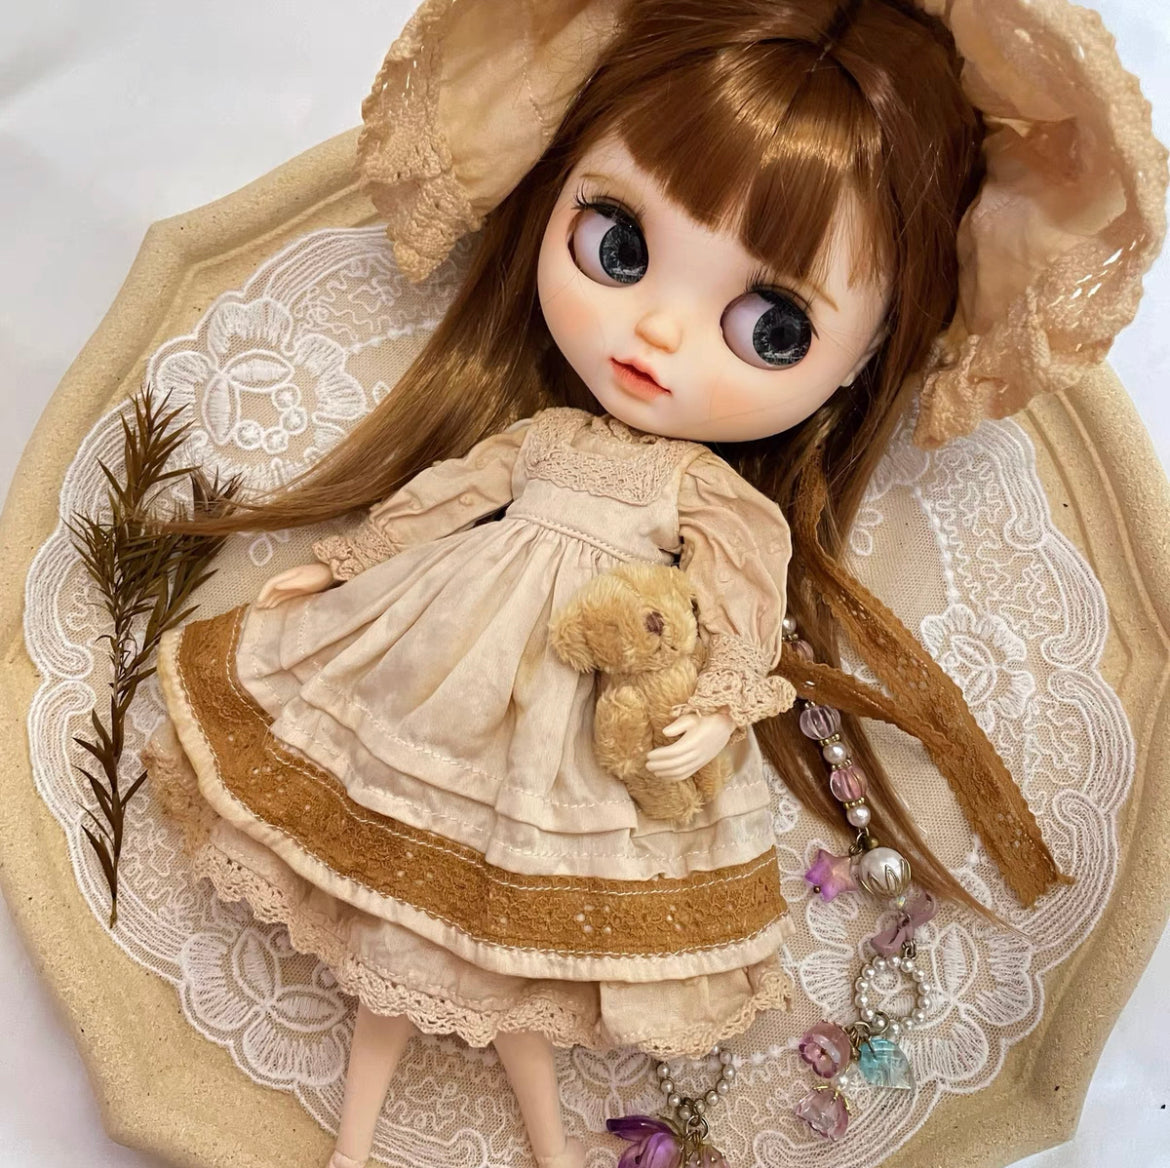 White Long Dress Night Dress for Blythe,BJD 1/6 Doll Clothes Customized 02